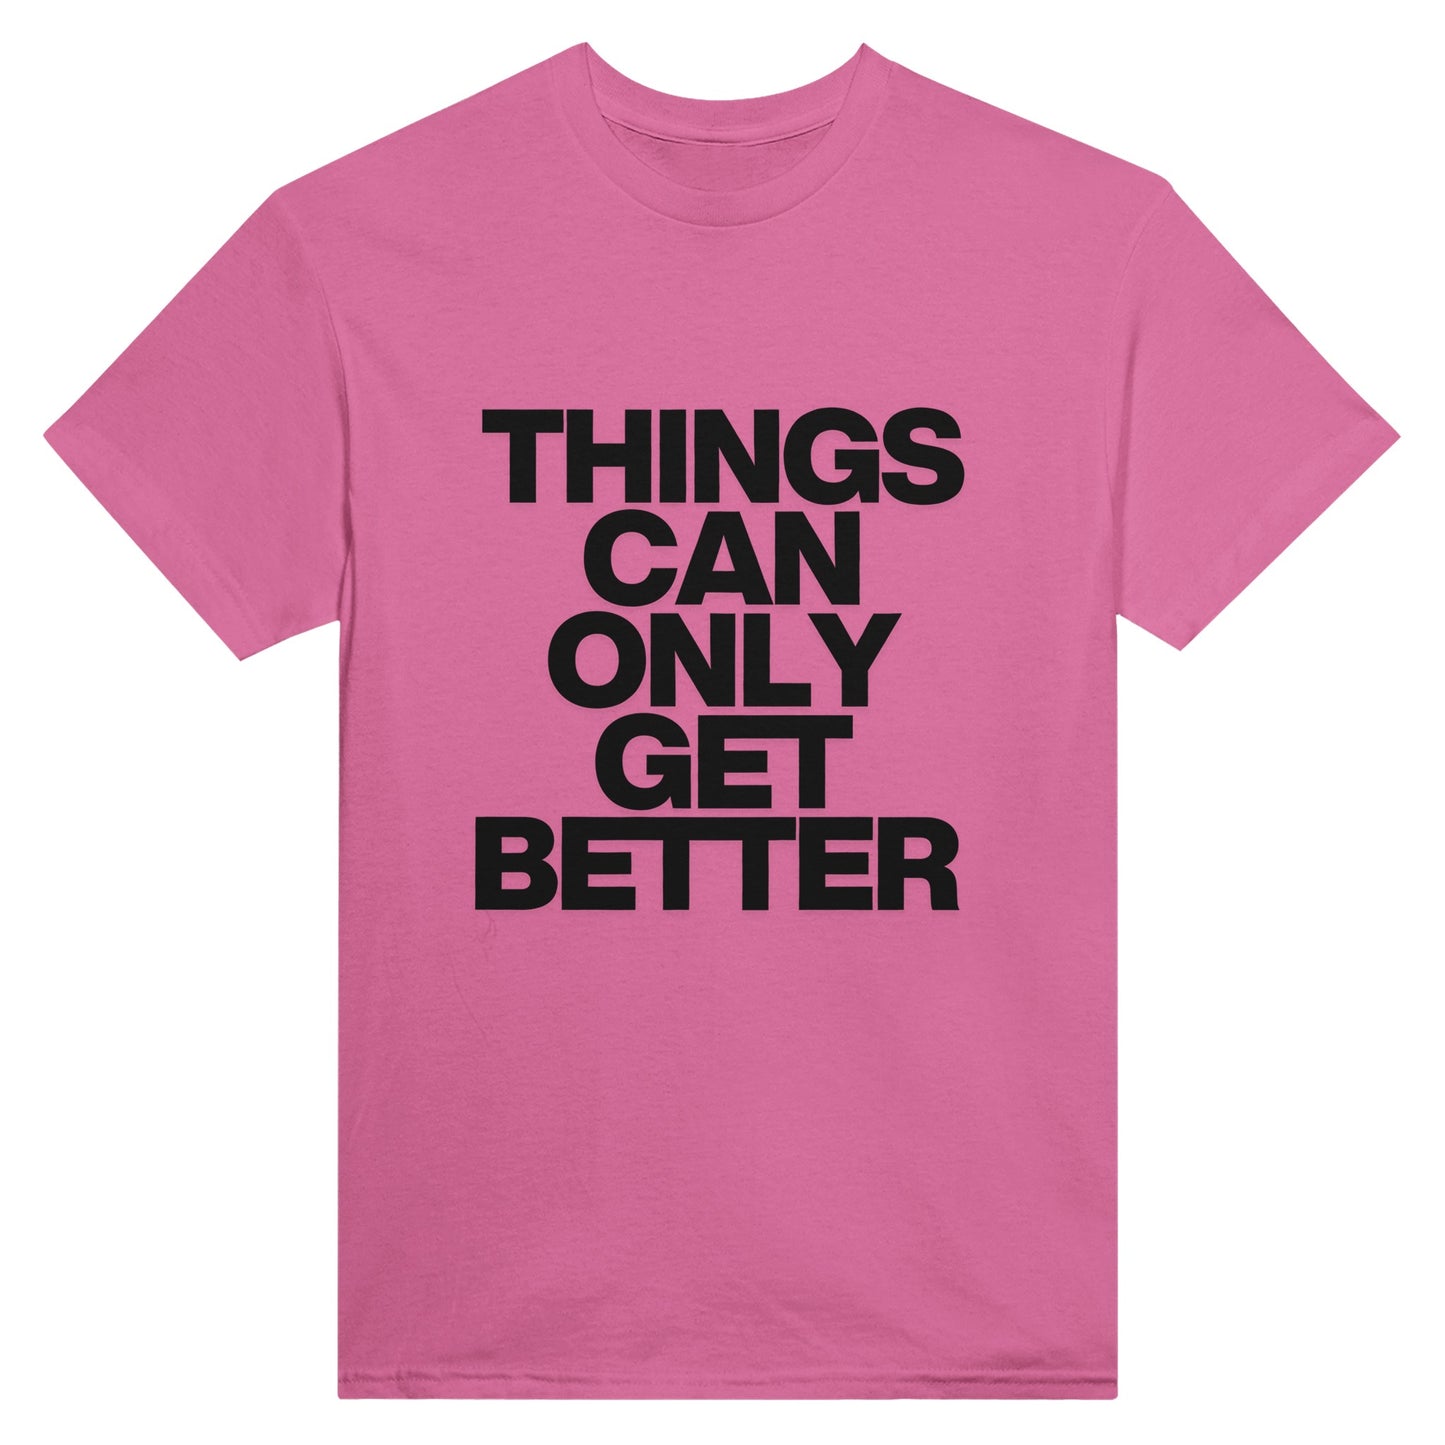 Things Can Only Get Better T-shirt in pink - anti-tory election wear